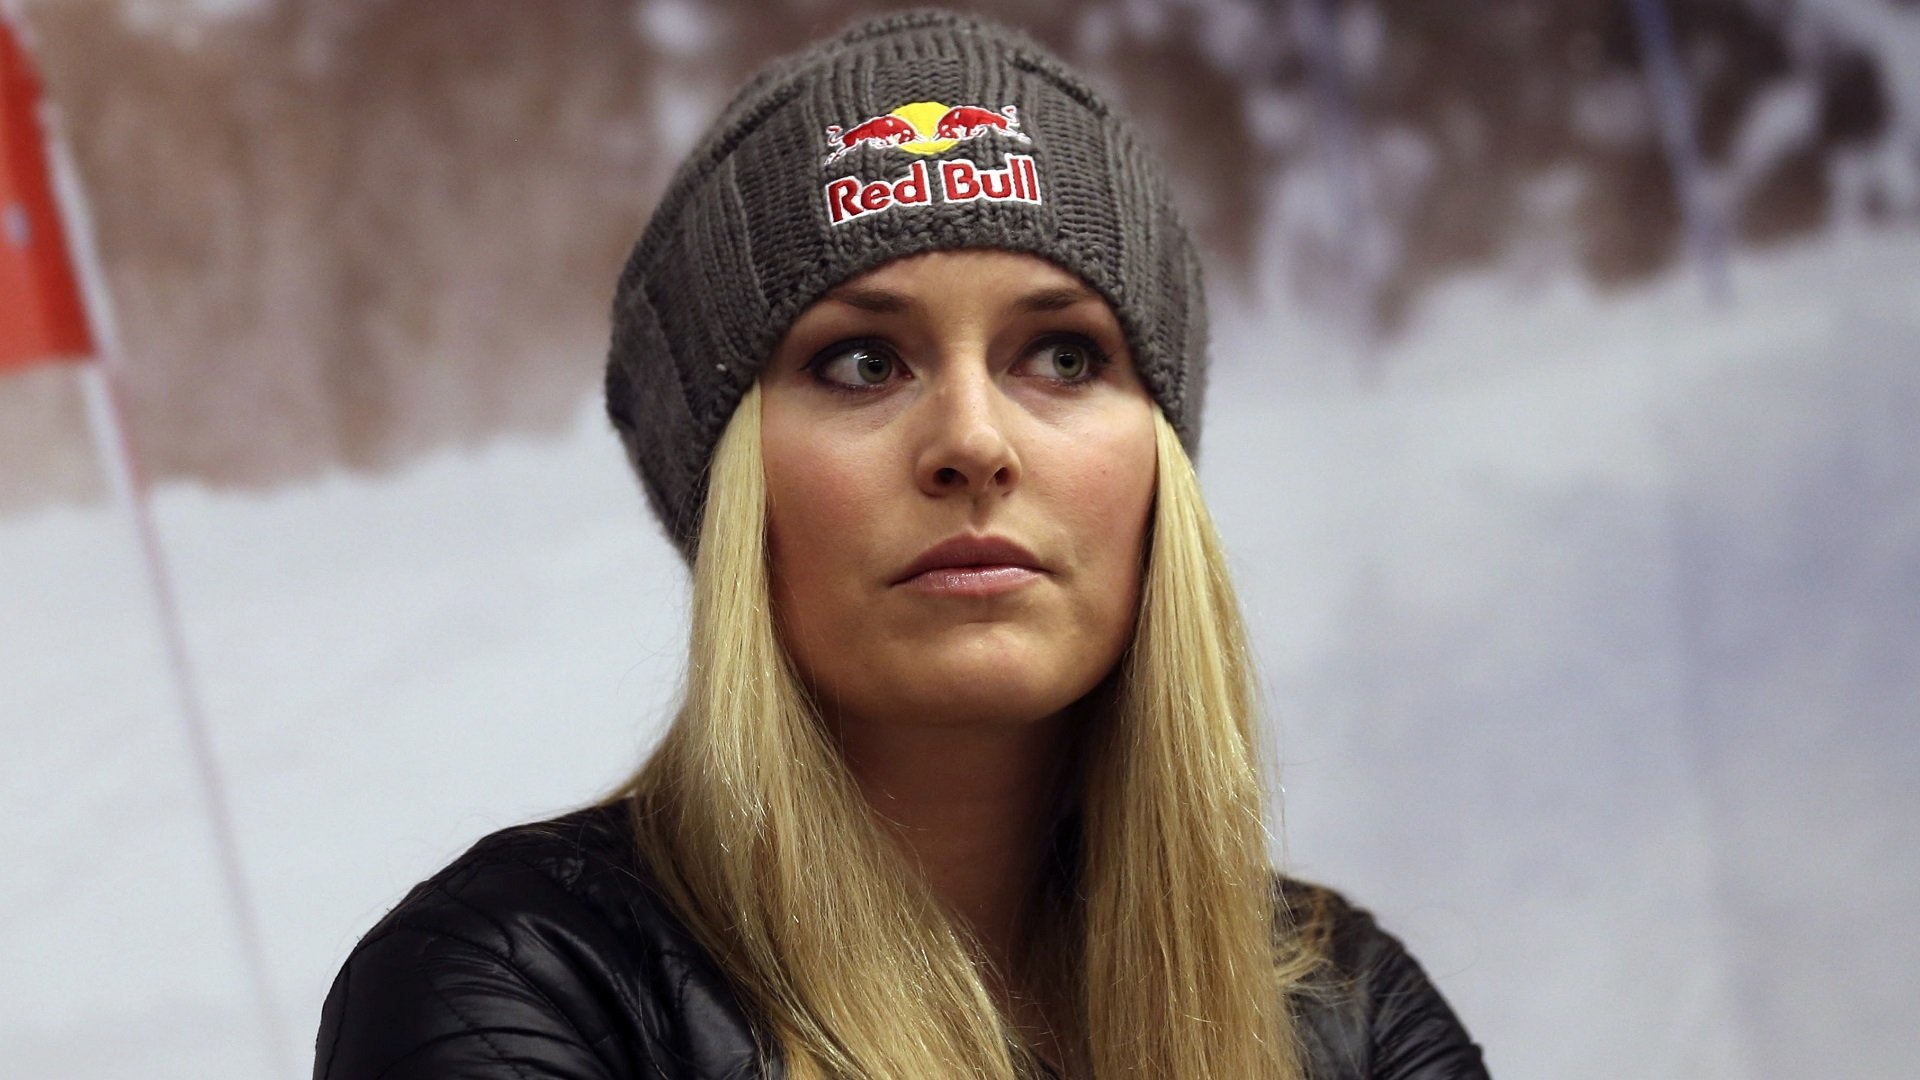 Lindsey Vonn, Skiing wallpapers, Desktop and mobile themes, Personalized style, 1920x1080 Full HD Desktop